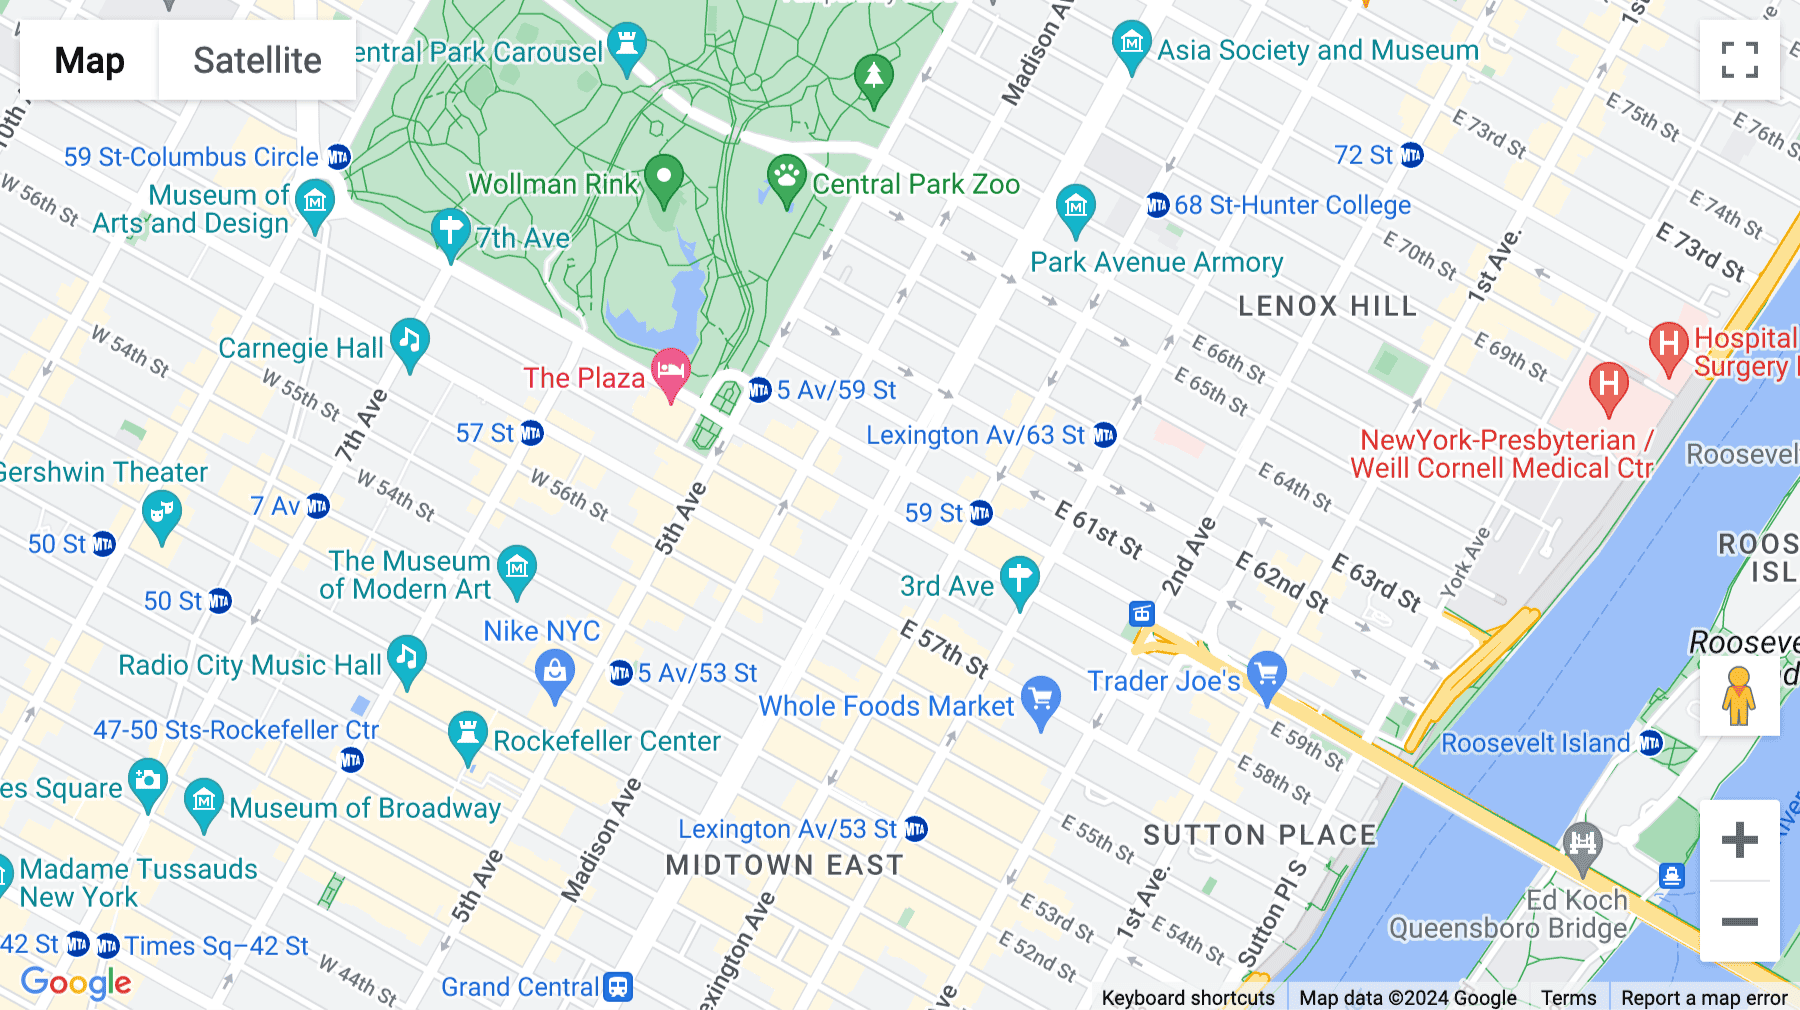 Click for interative map of 505 Park Avenue, New York City